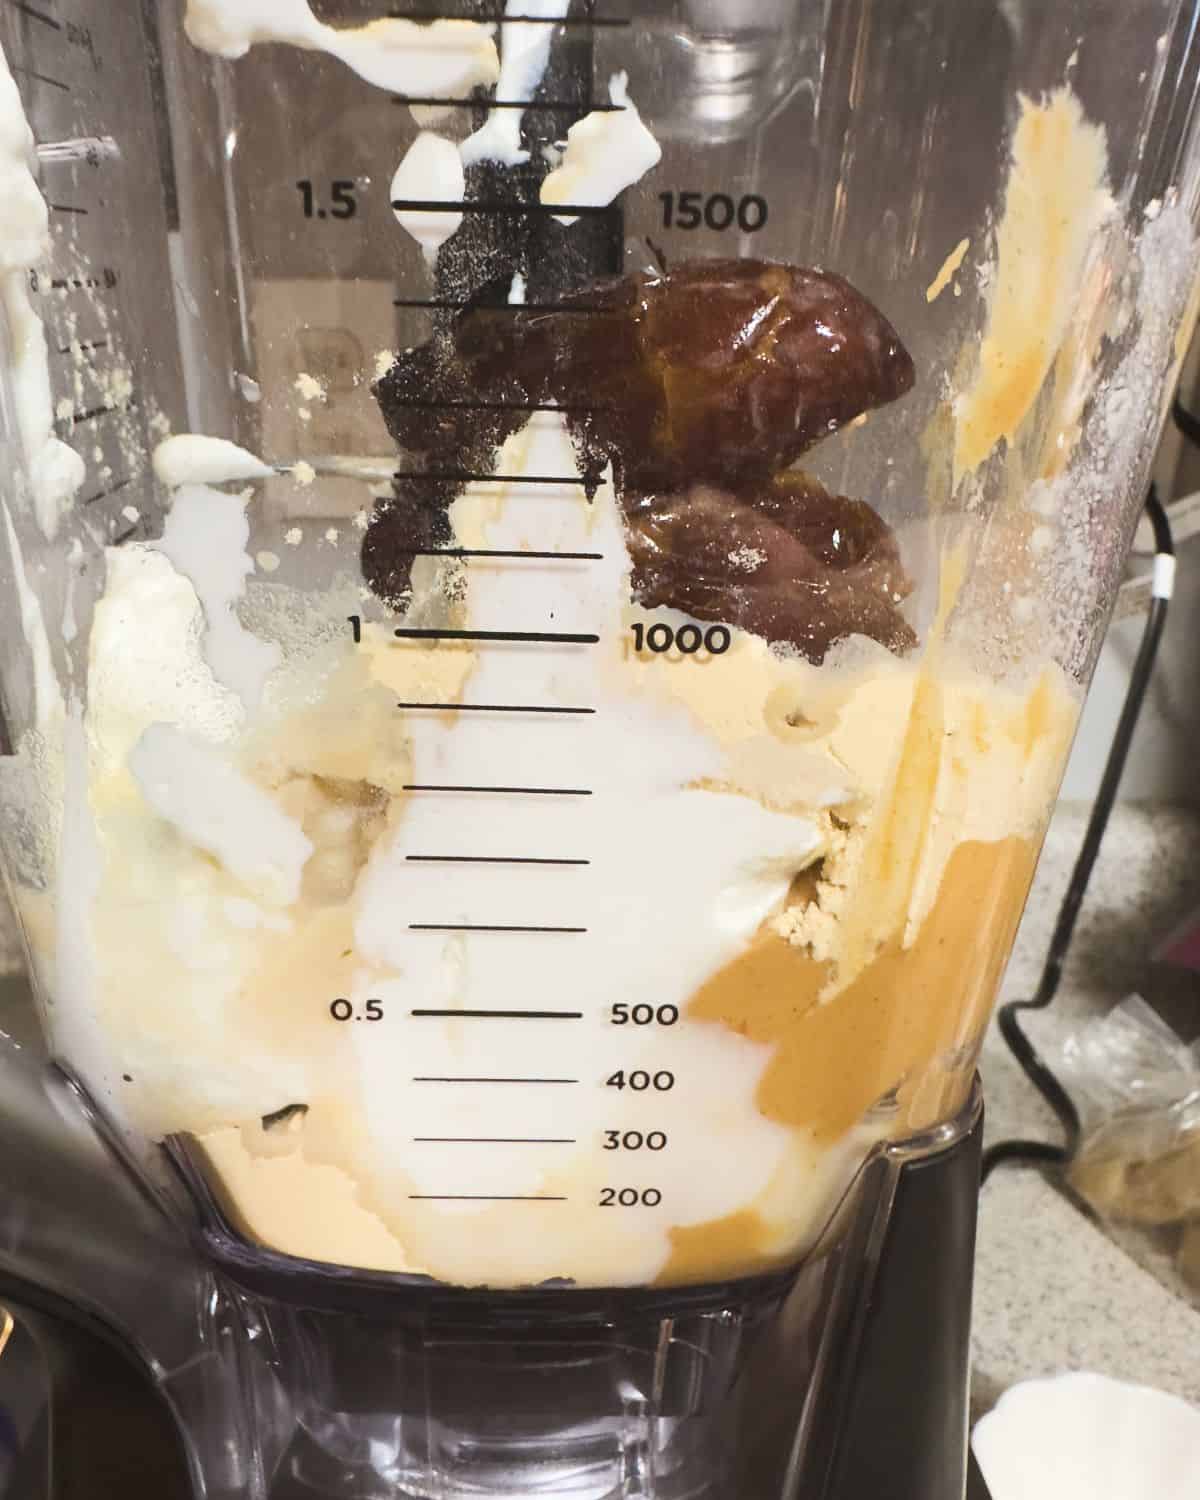 A blender filled with the ingredients for a peanut butter paradise smoothie including Medjool dates and a creamy mixture, awaiting blending.